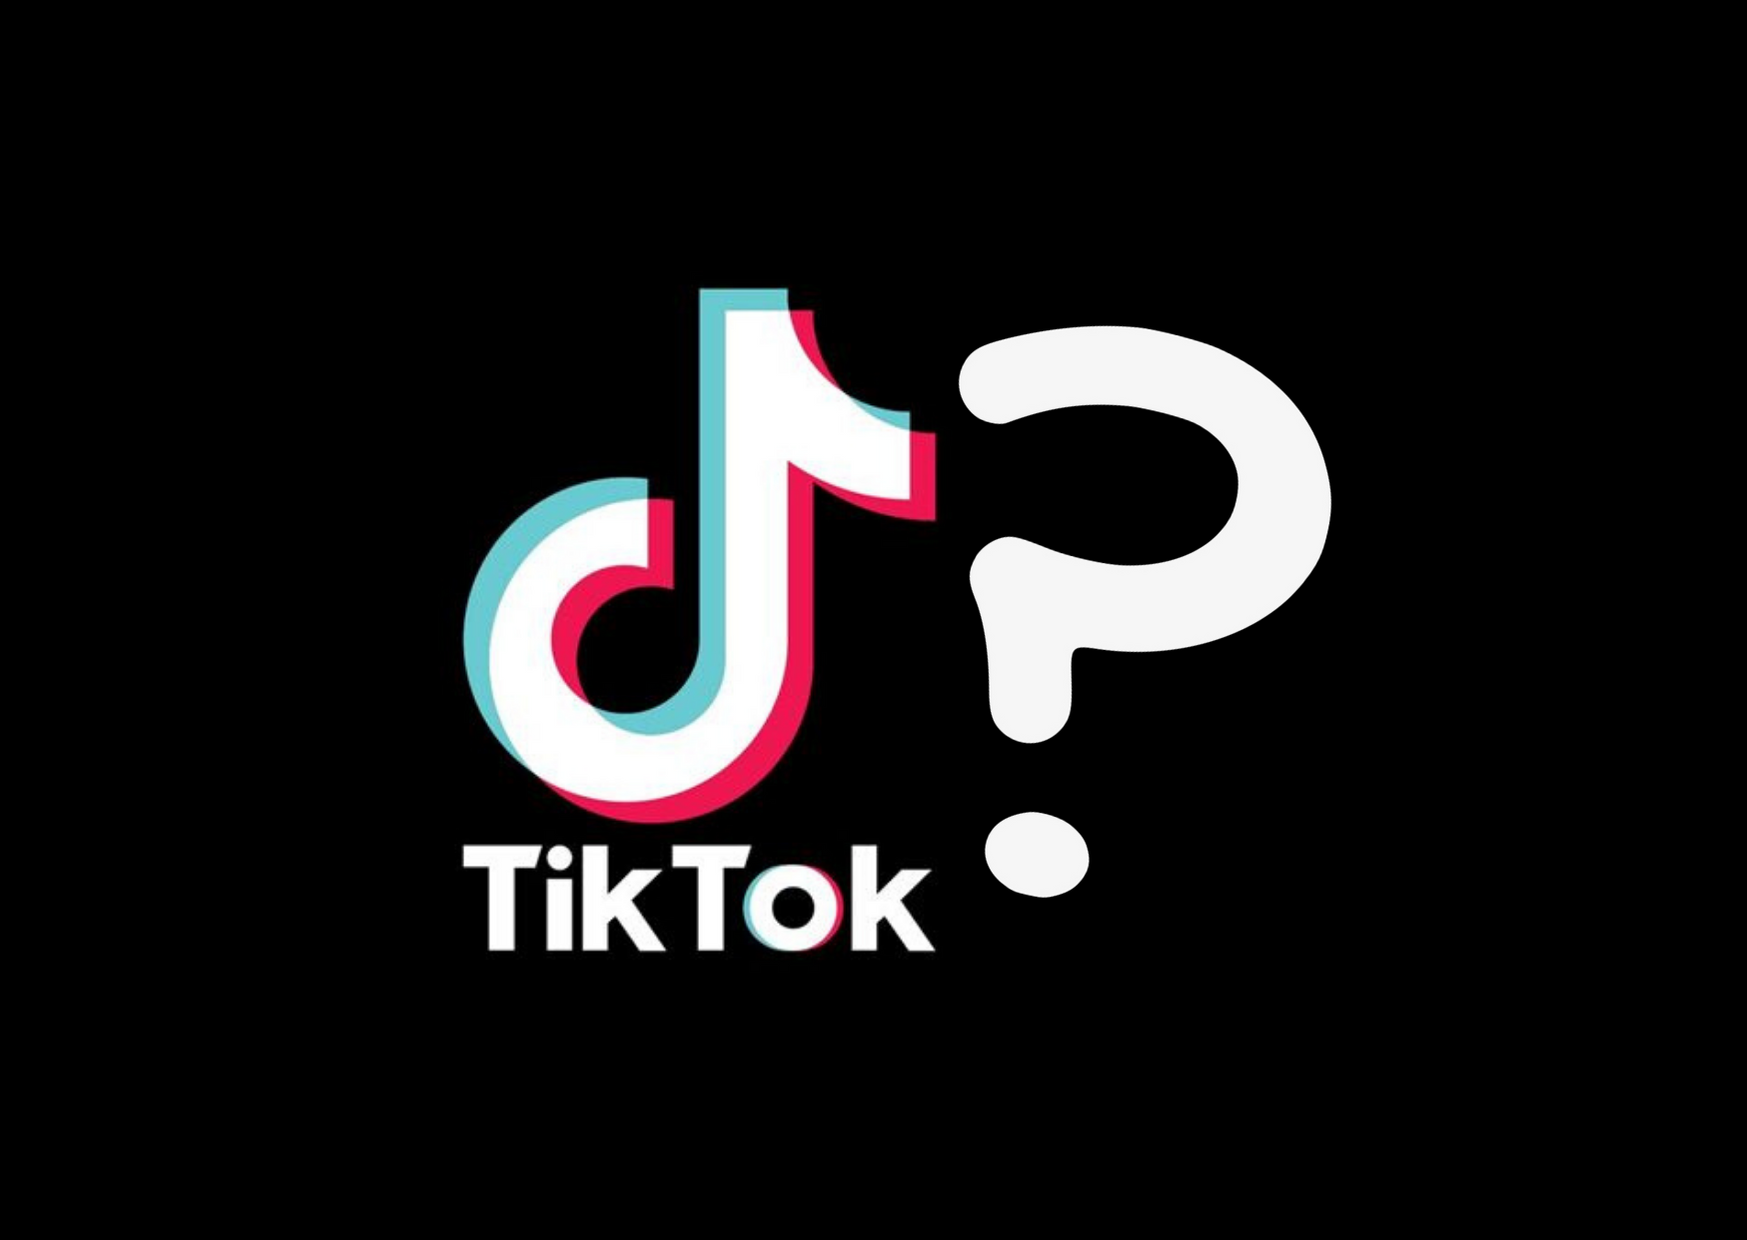 Voicy sounds blog on TikTok Beginners Guide: Tips For Viewers and Creators